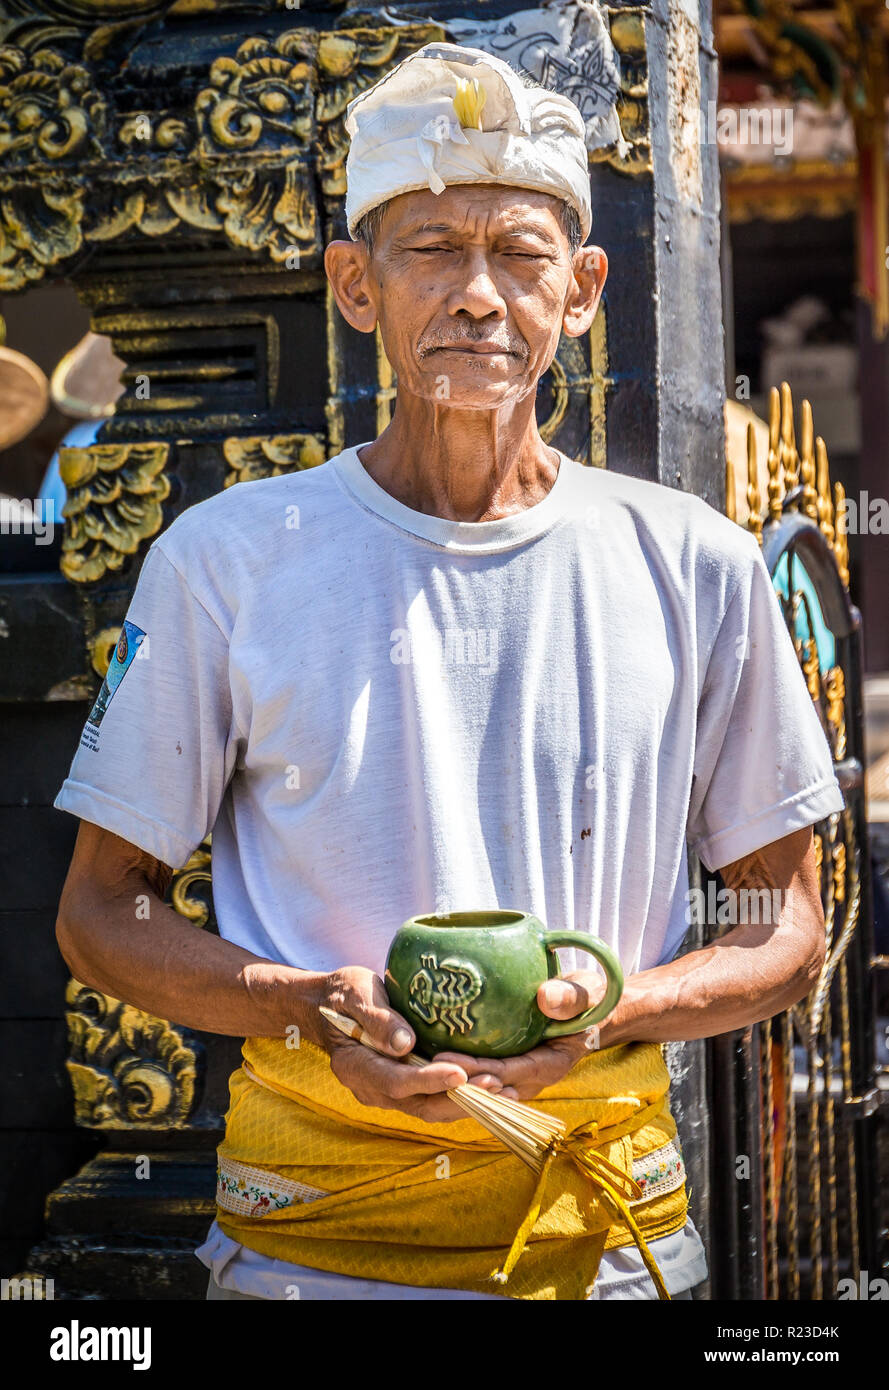 BALI, INDONESIA - APRIL 25, 2018: Portrait of a balinese senior man in front of his house, Indonesia Stock Photo